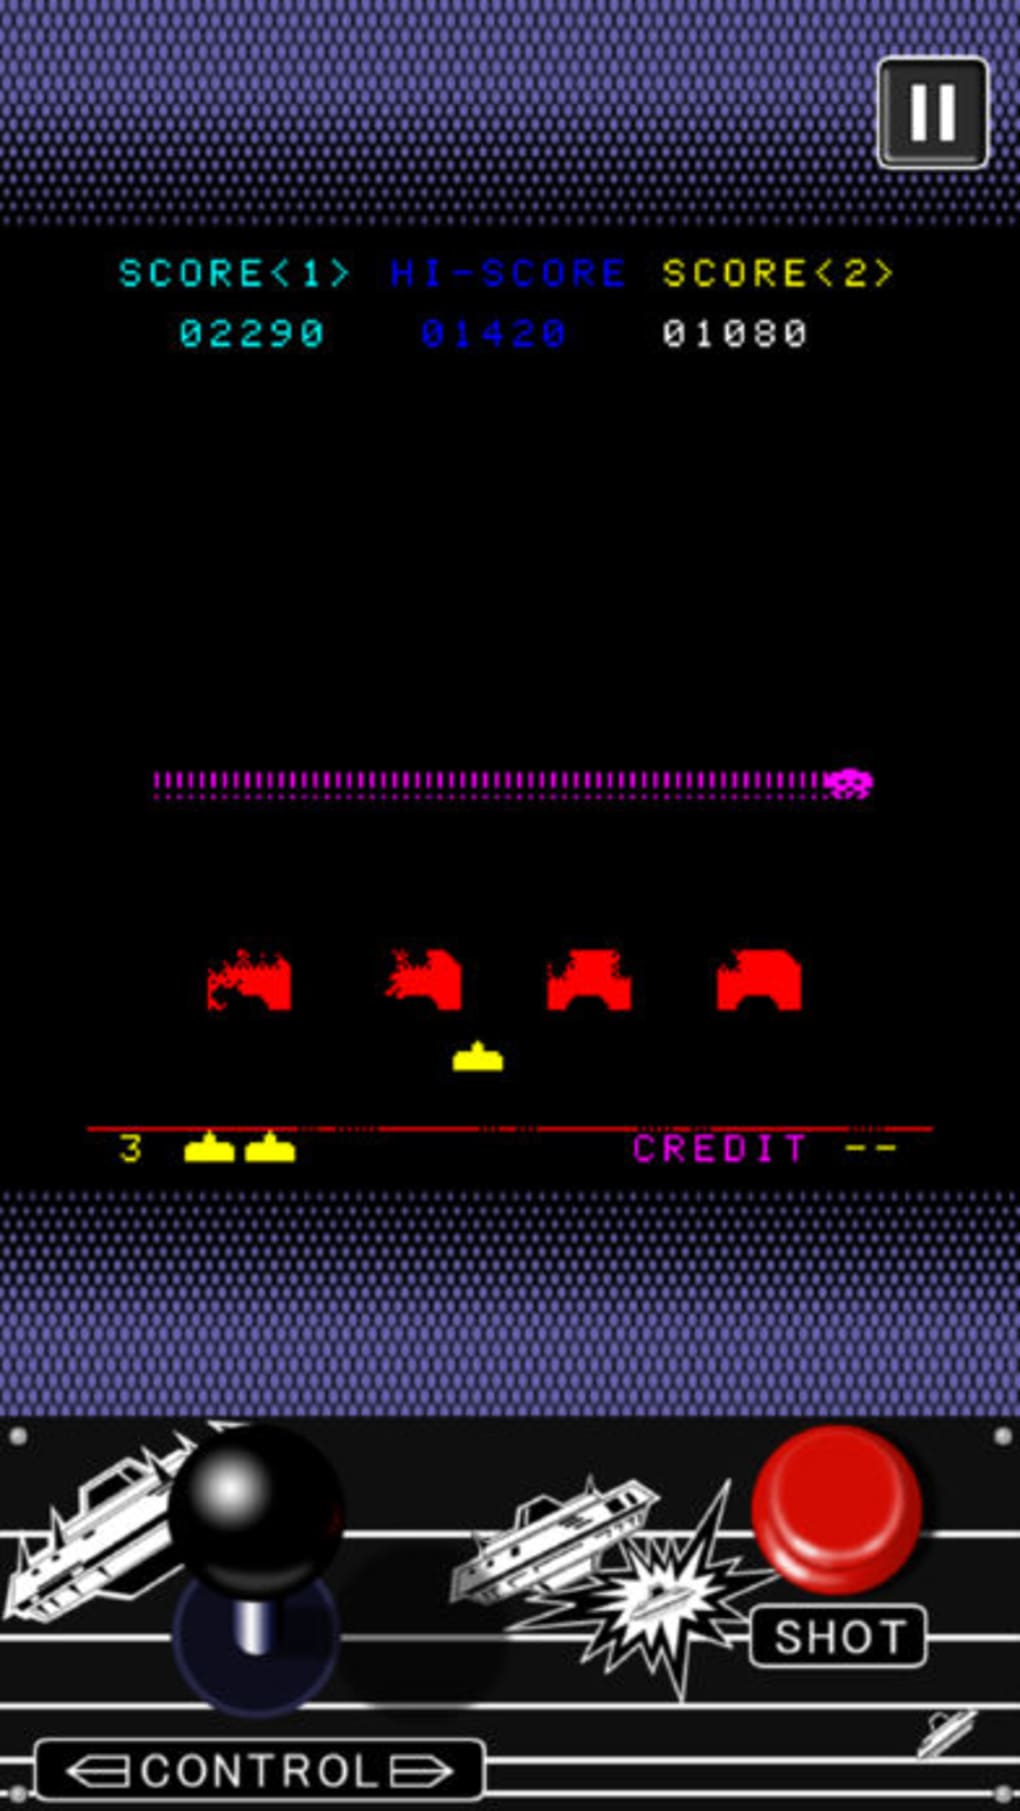 space invaders for iphone free download